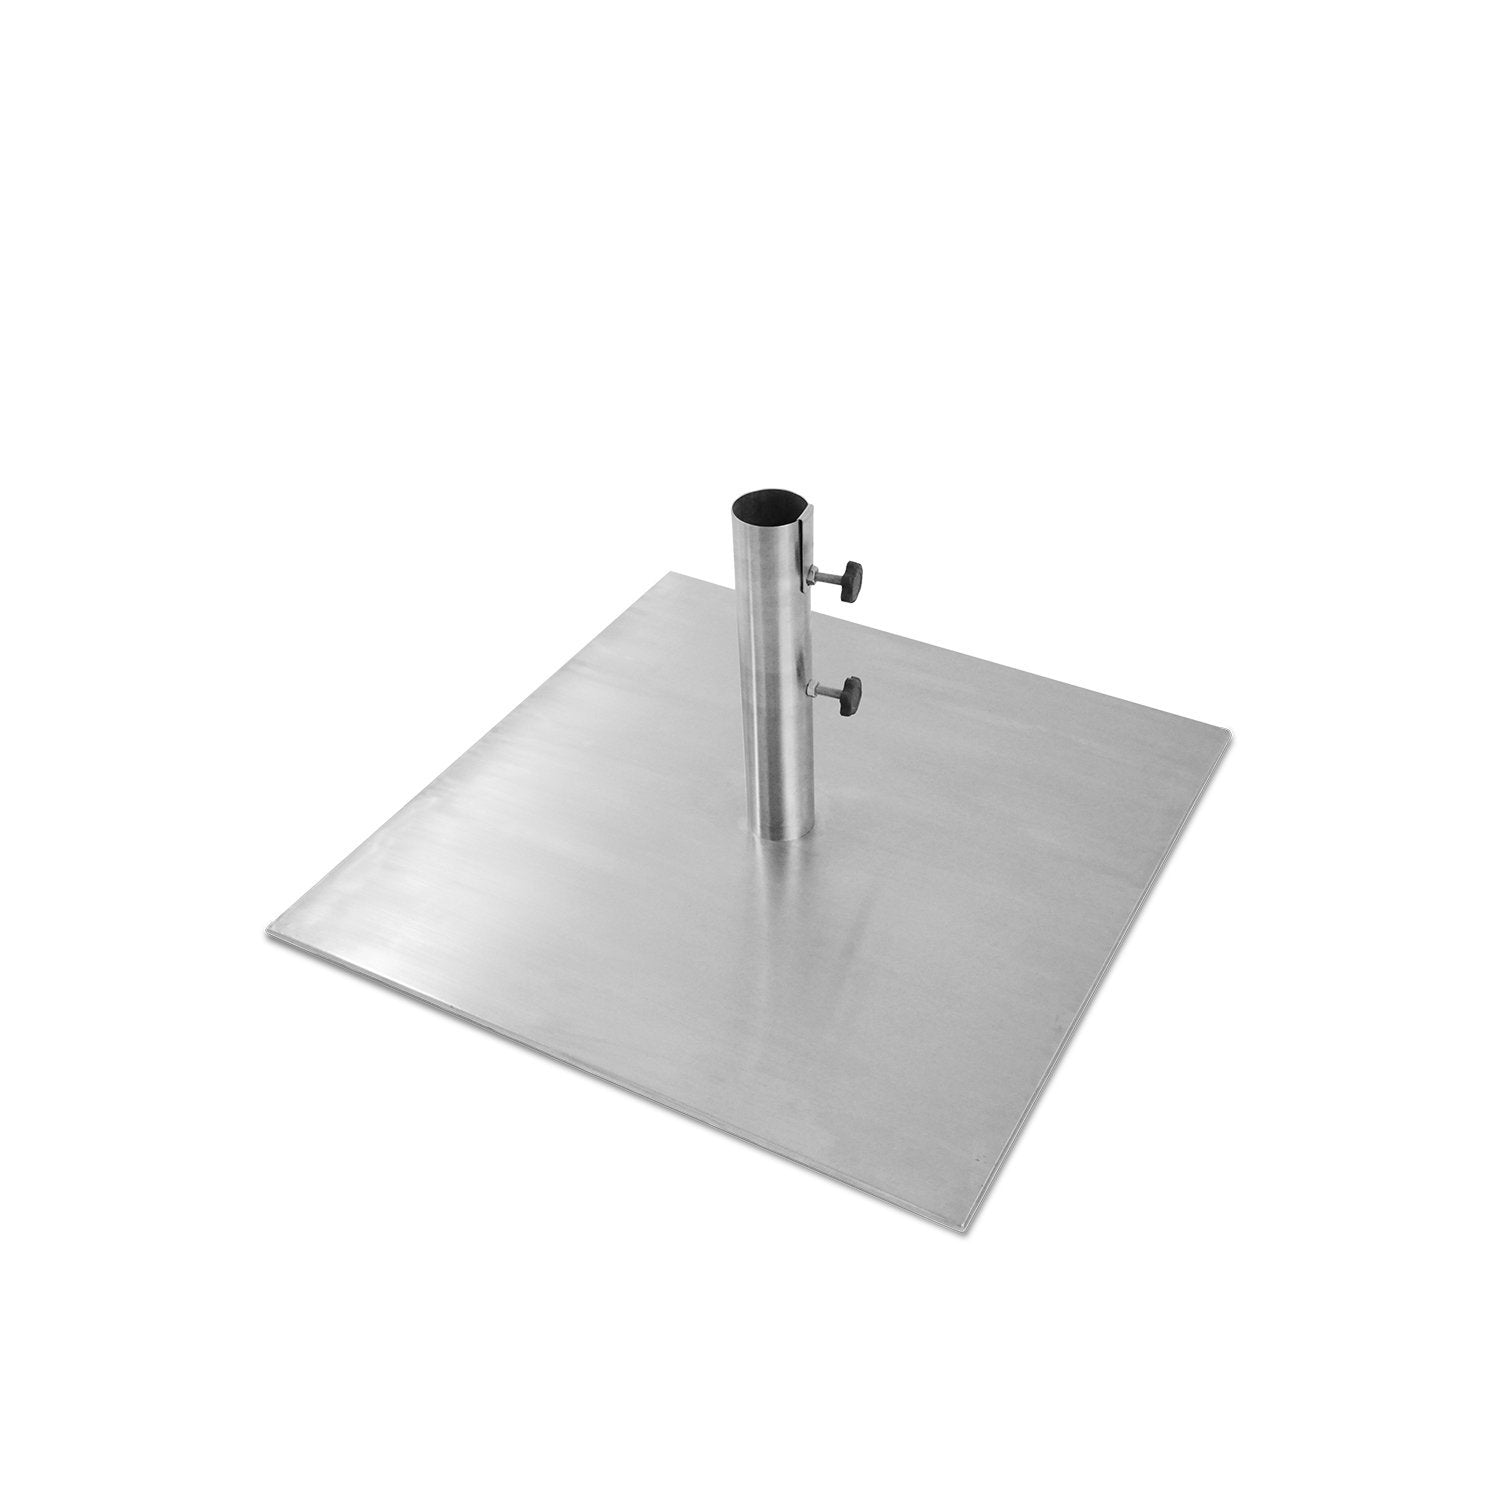 Stainless Steel 25kg flat base